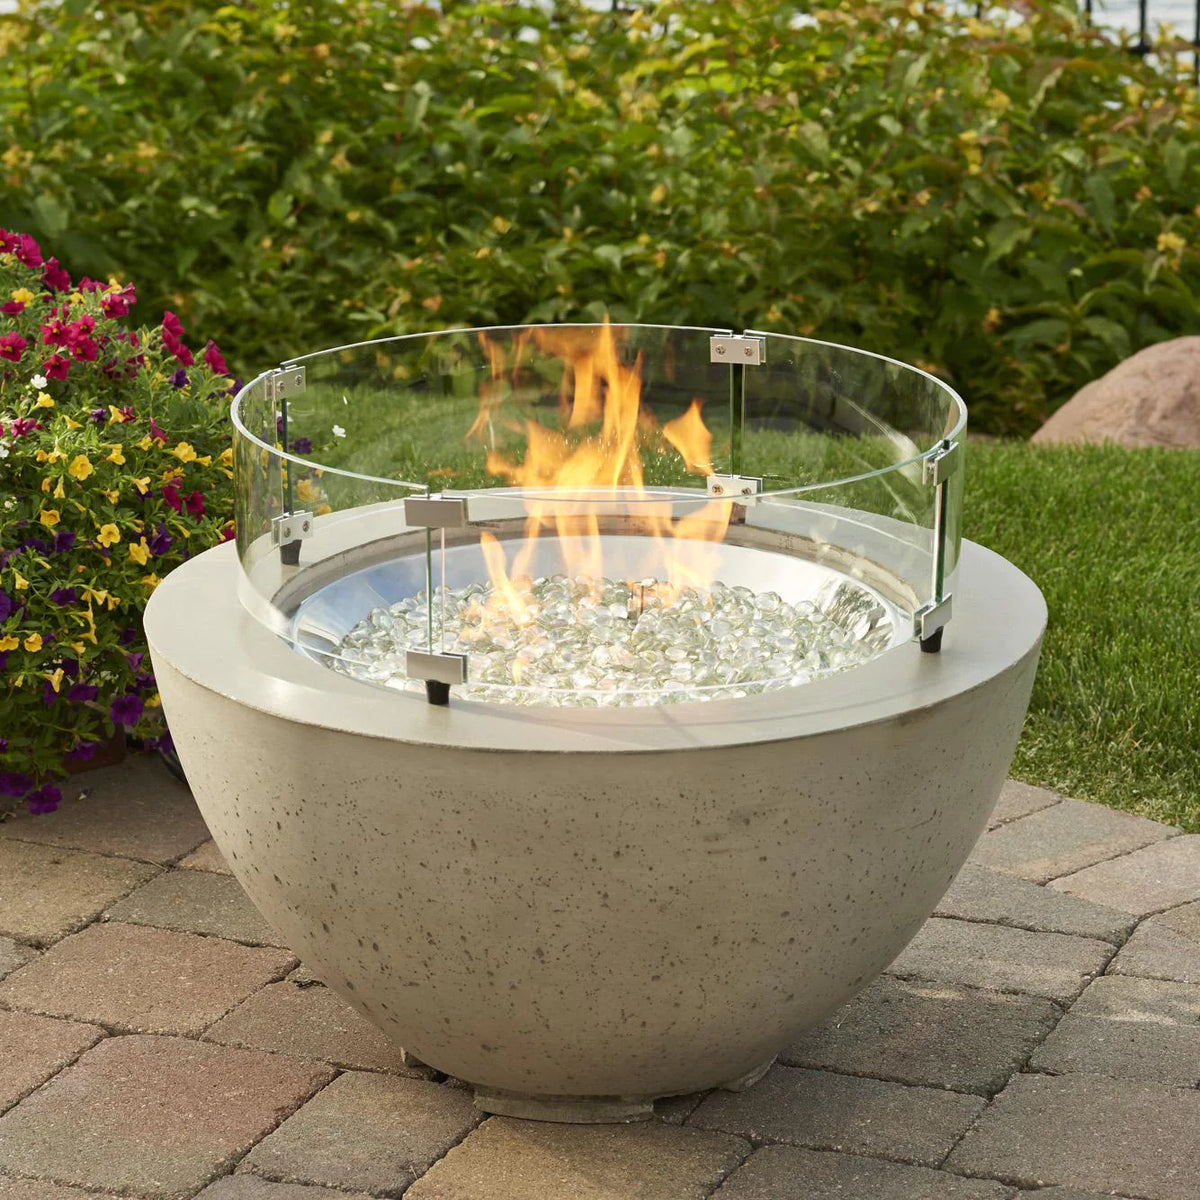 The Outdoor GreatRoom Company Cove 29-Inch Round Propane Gas Fire Pit Bowl with 20-Inch Crystal Fire Burner - Natural Grey - CV-20 - Room By The Tree 